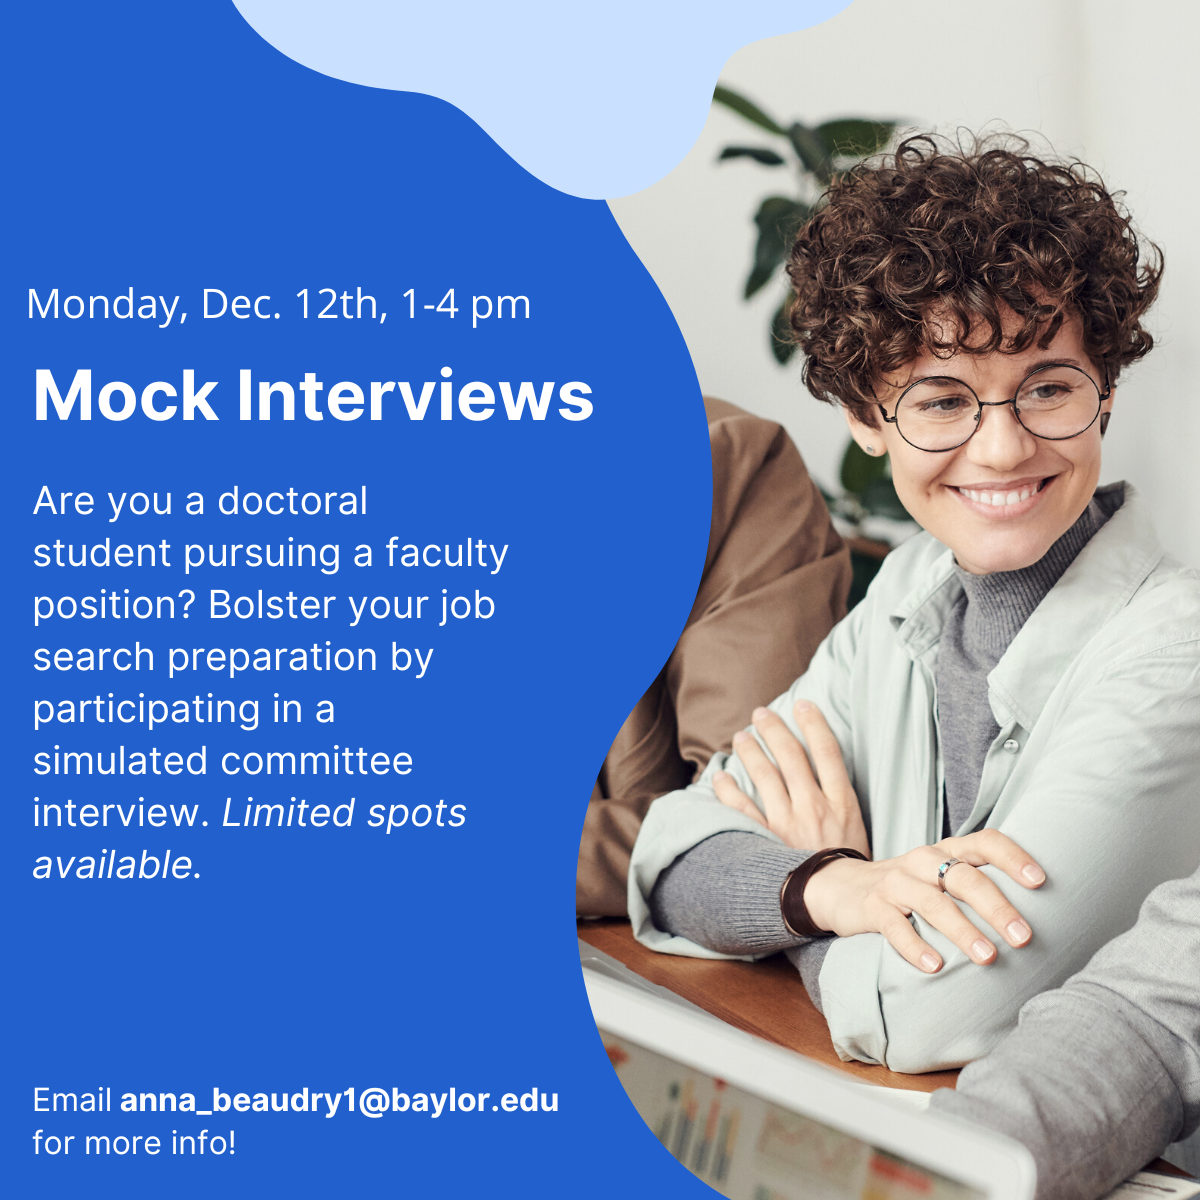 Monday, Dec. 12th, 1-4 pm. Mock Interviews. Are you a doctoral student pursuing a faculty position? Bolster your job search preparation by participating in a simulated committee interview. Limited spots available. Email anna_beaudry1@baylor.edu for more info!